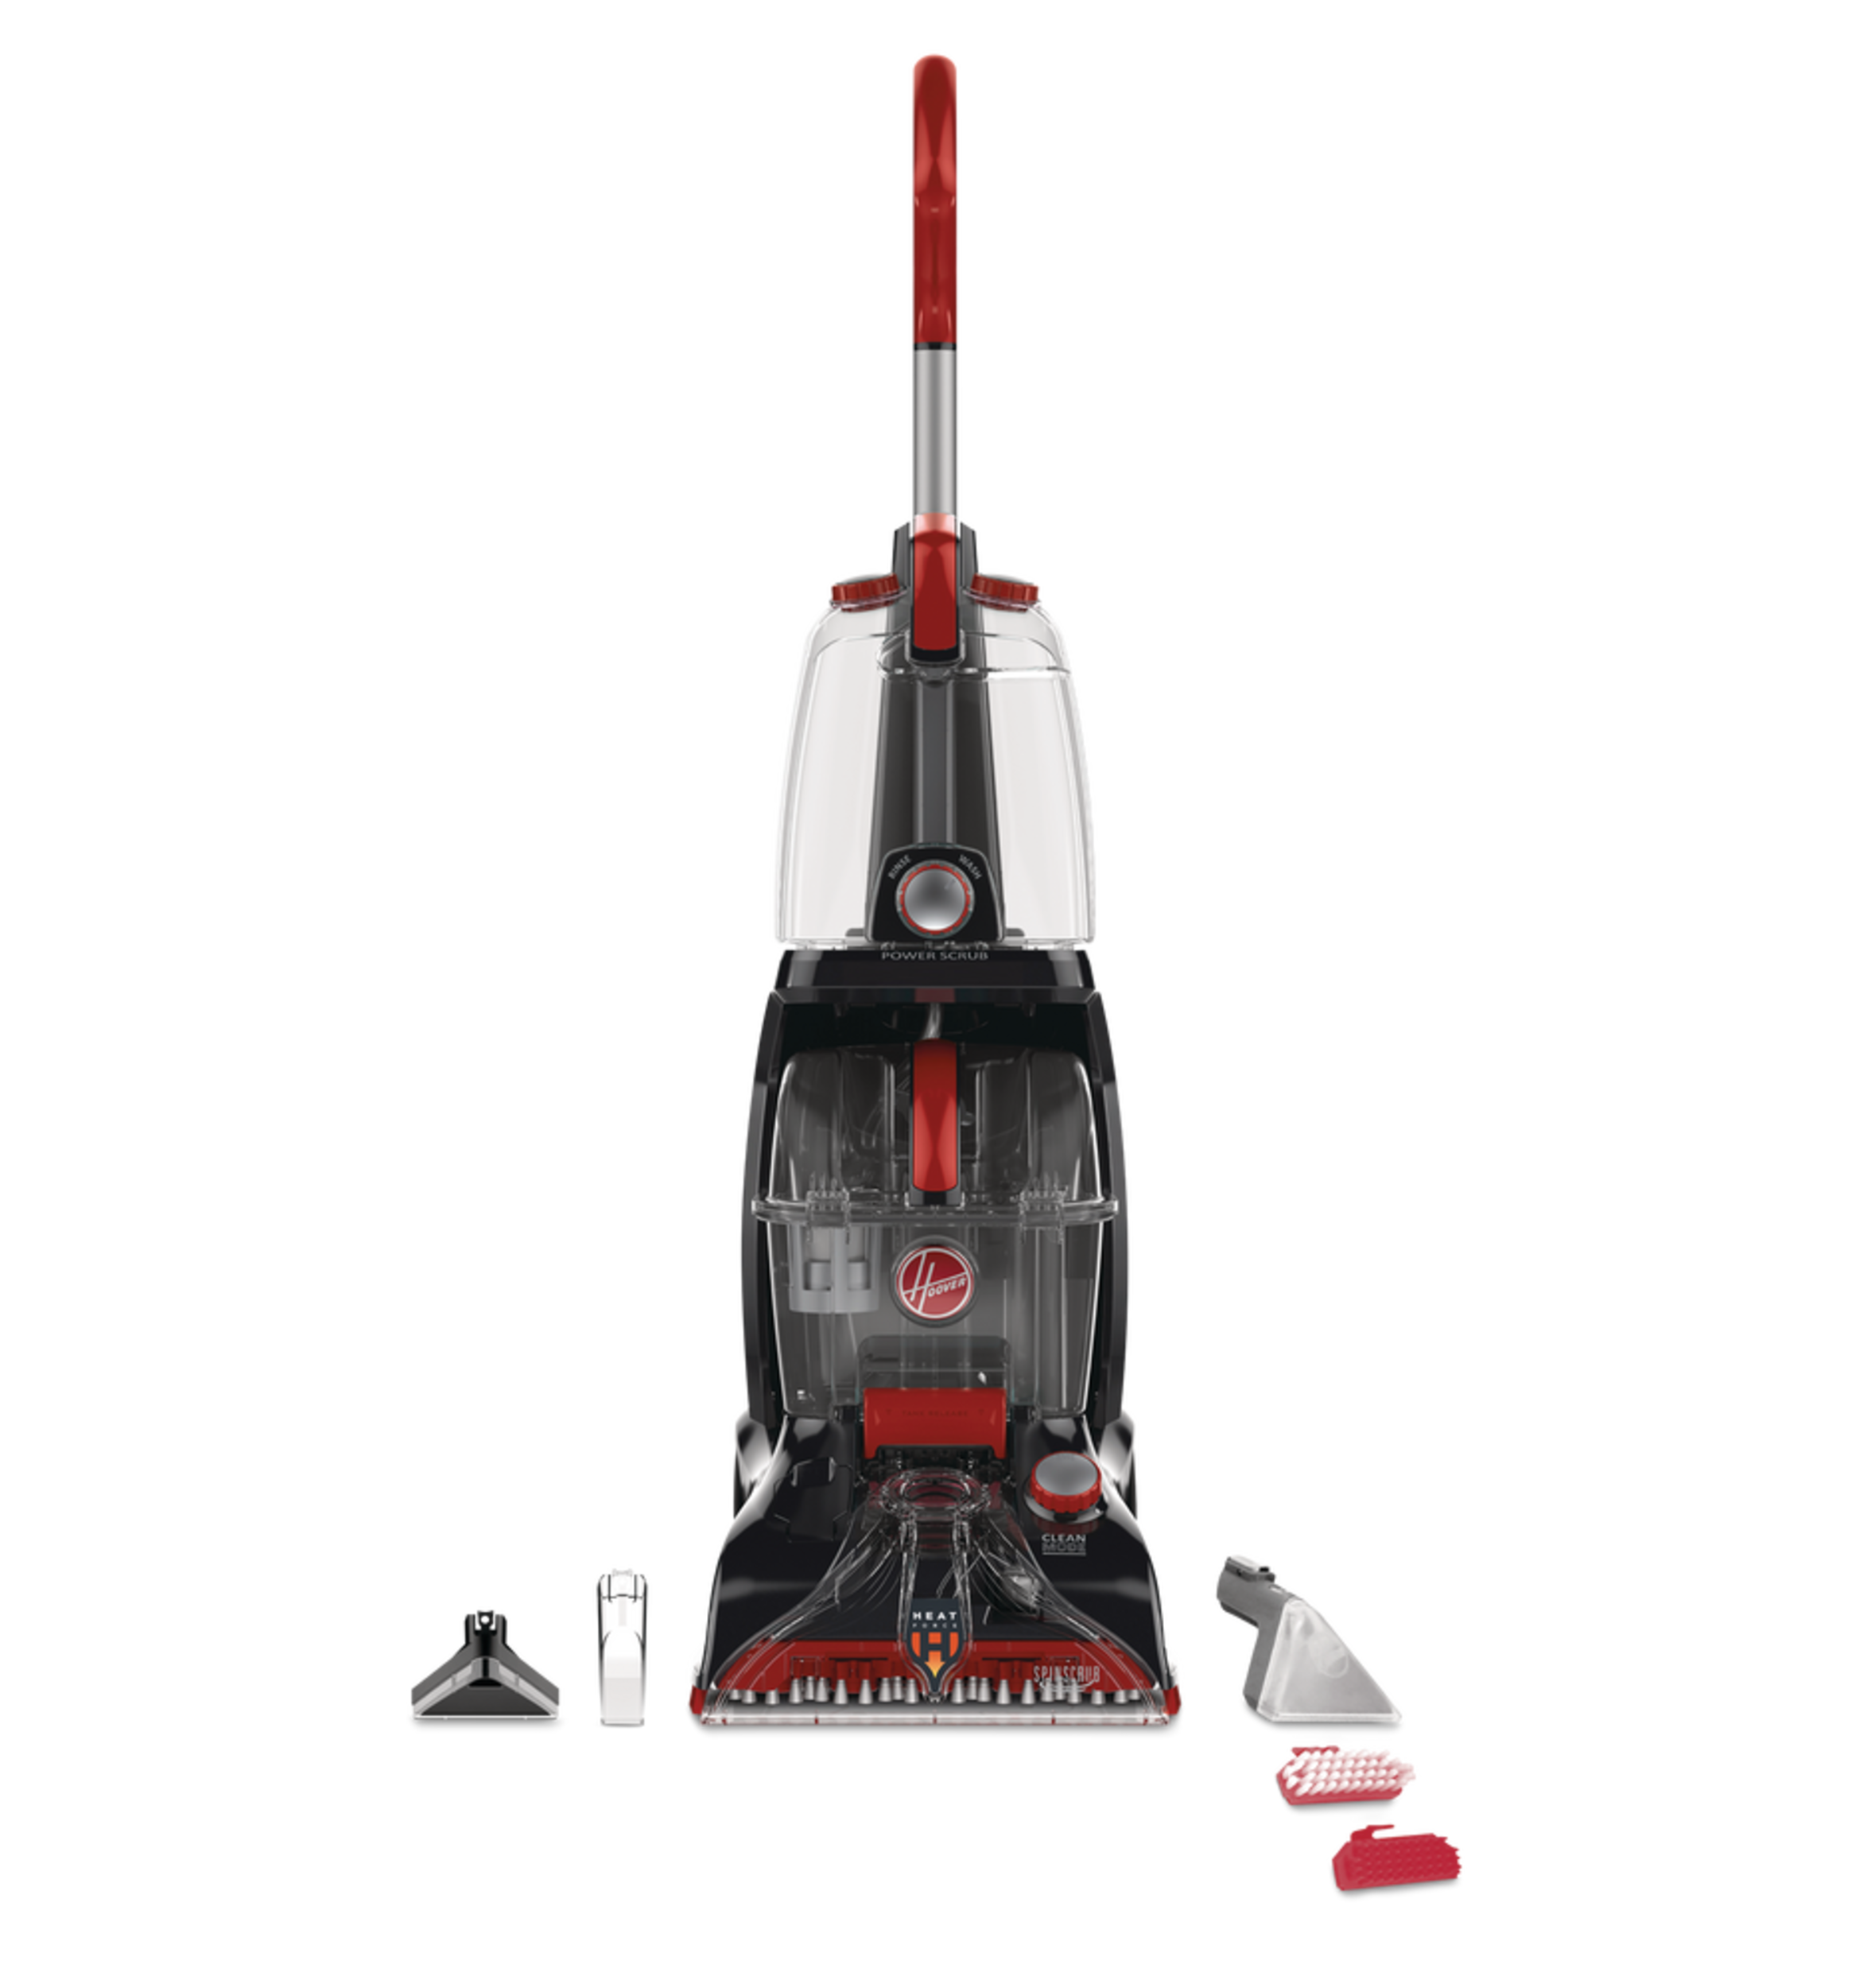 Hoover® Power Scrub Quick Dry Pet Upright Carpet & Upholstery Deep Cleaner FH50259CDI (Refurbished - 90 Days Warranty)